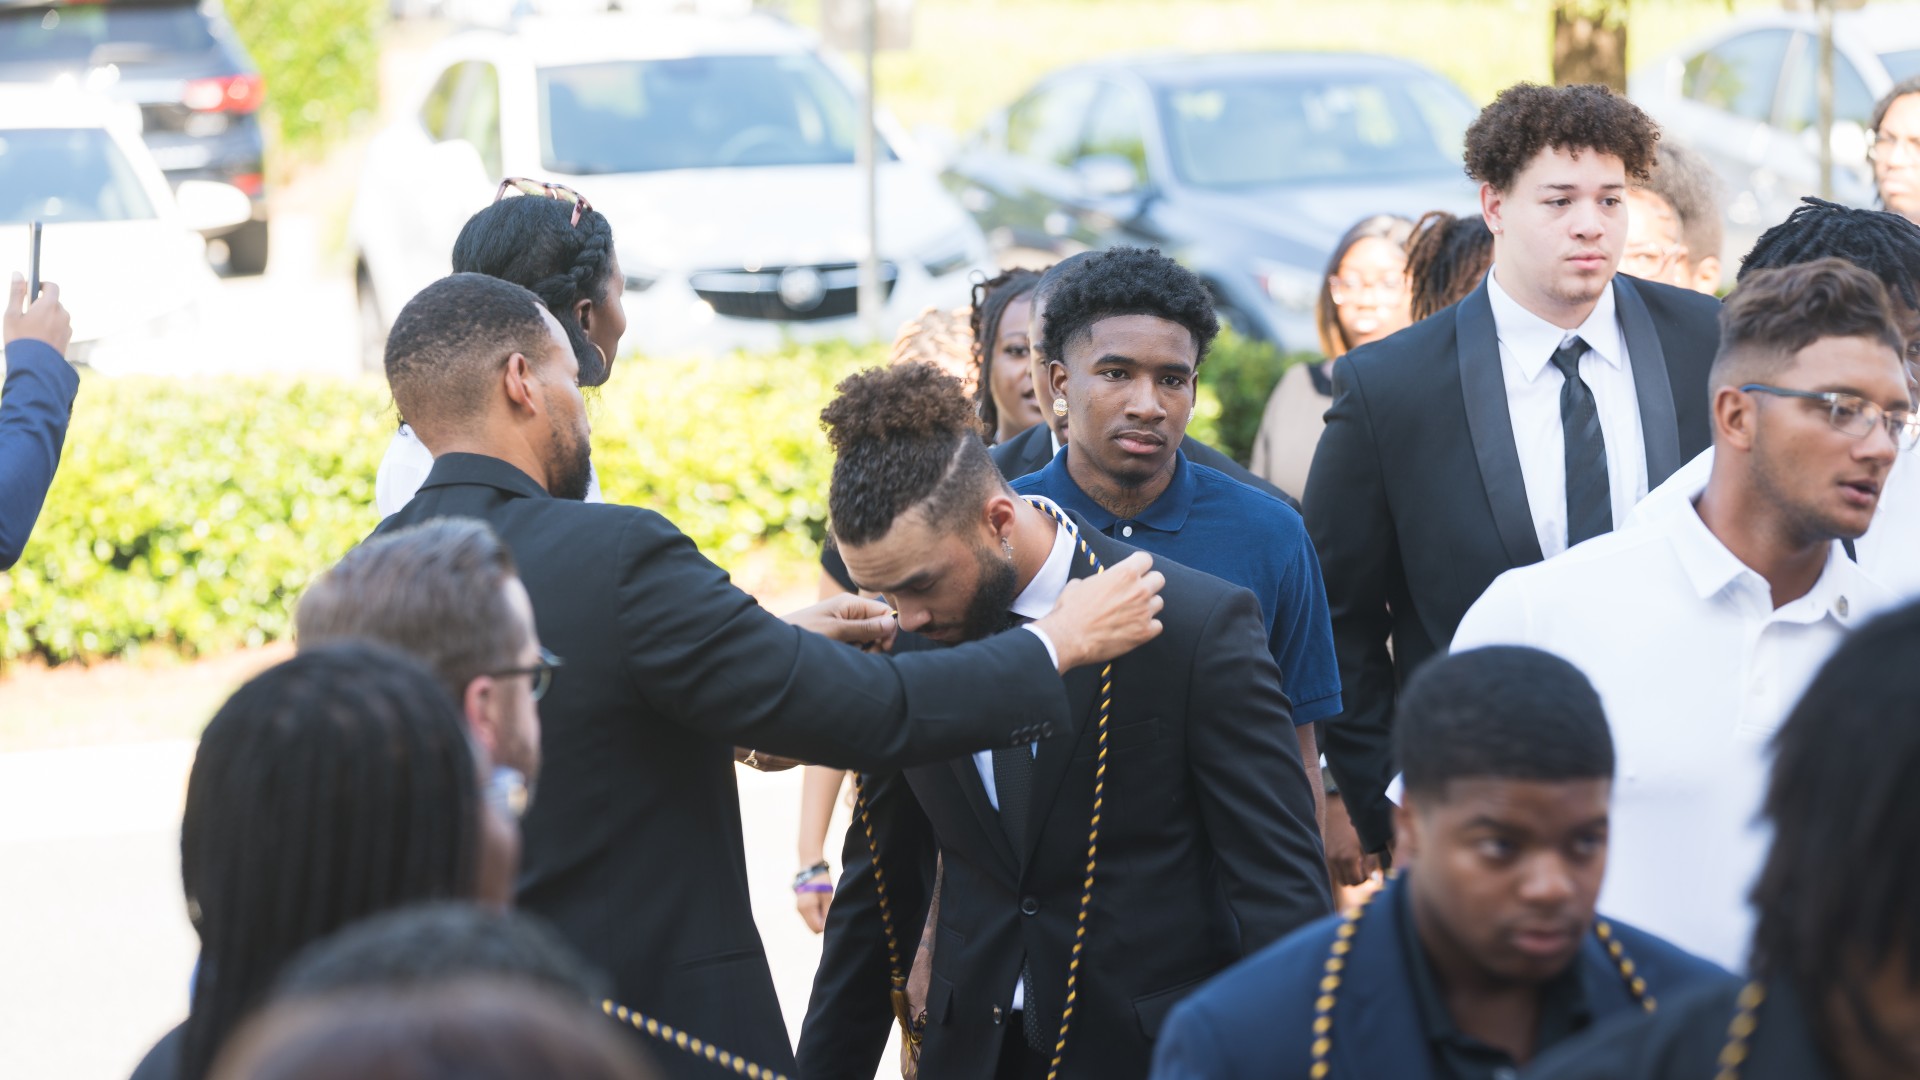 Freshmen were given their cords as they entered Jane M. Smith Church